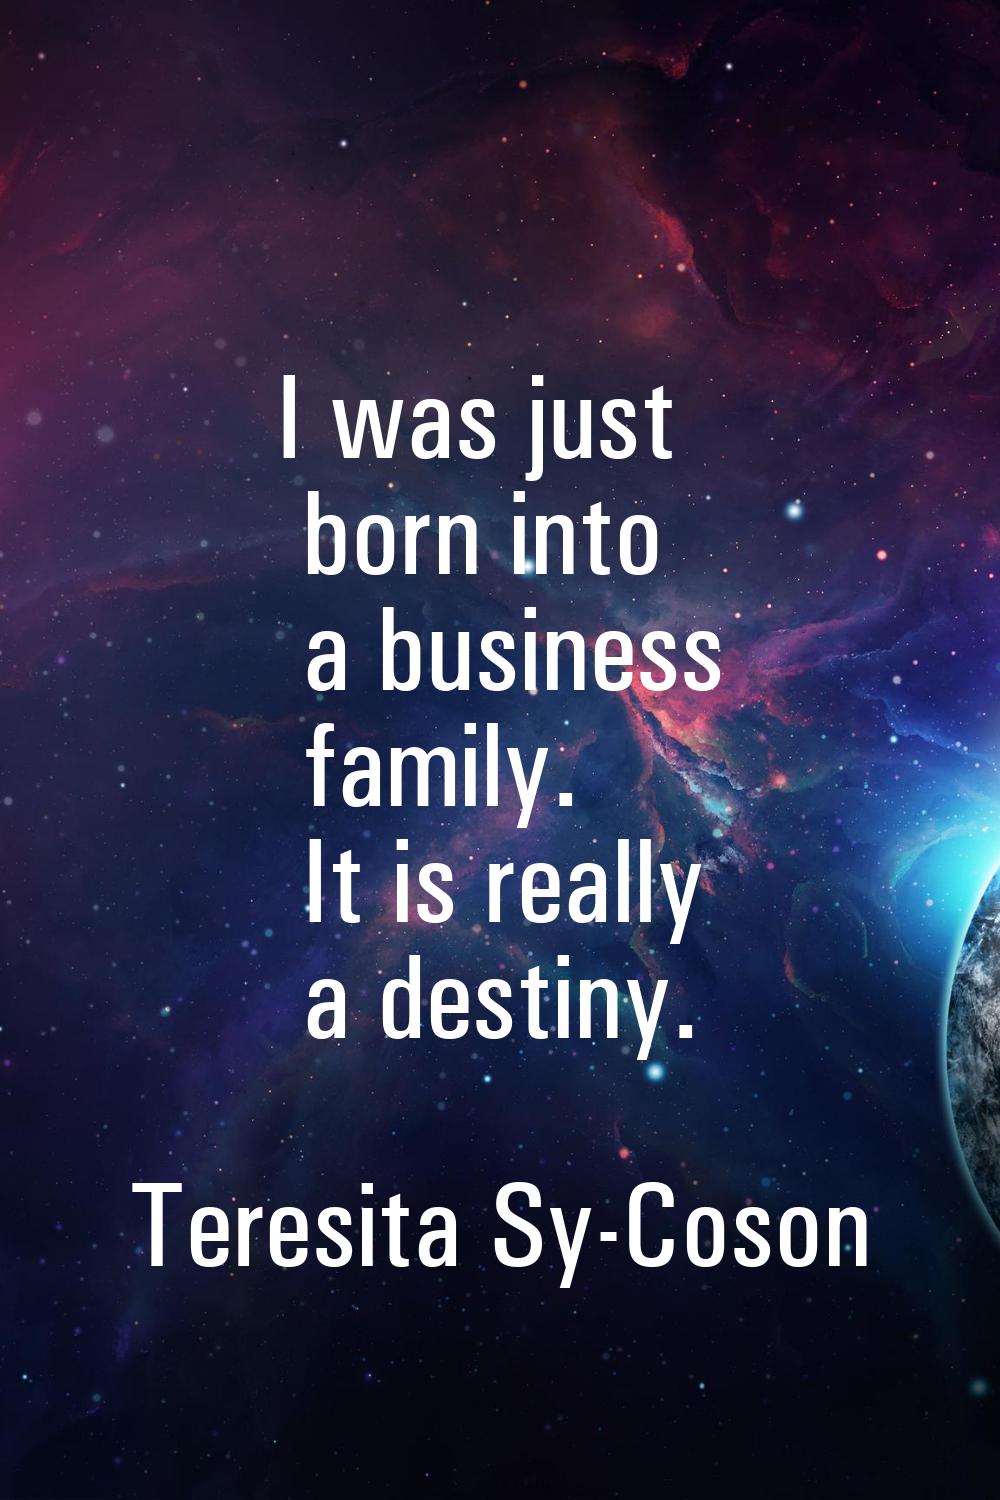 I was just born into a business family. It is really a destiny.